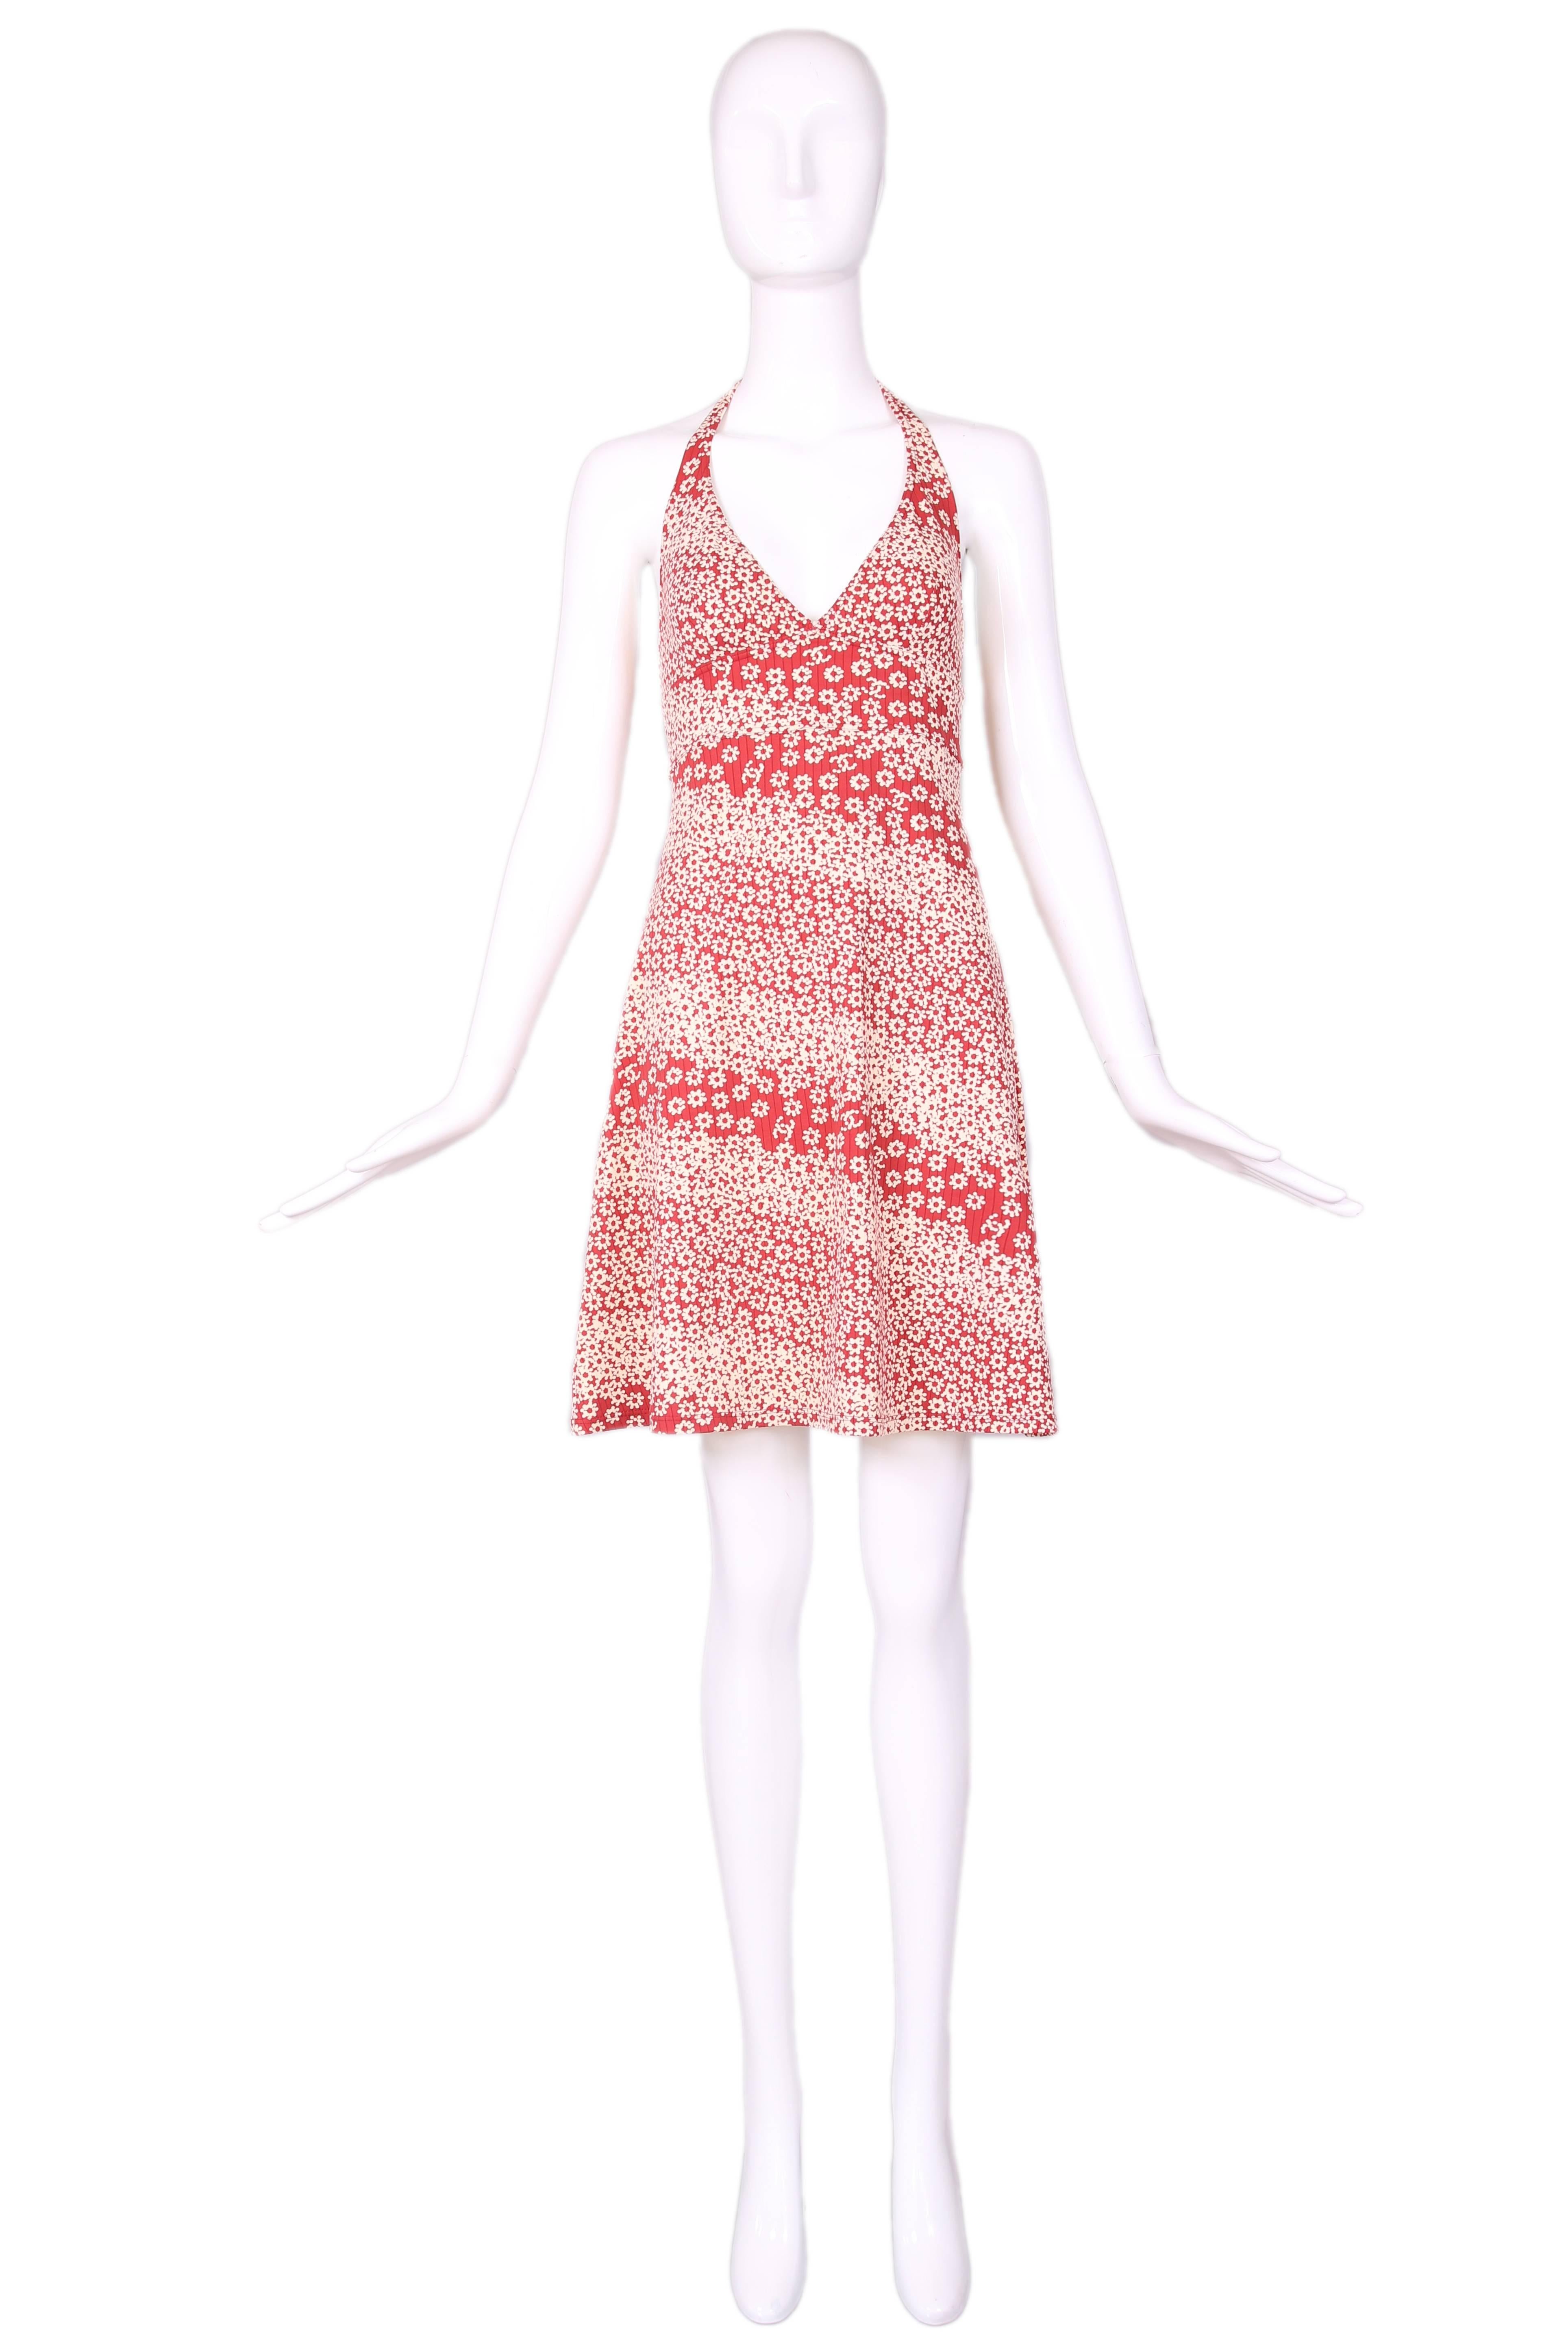 Chanel red & white floral print, stretch halter mini dress w/CC logo motif. In excellent condition. No size tag, please consult measurements.
MEASUREMENTS:
Bust - 30